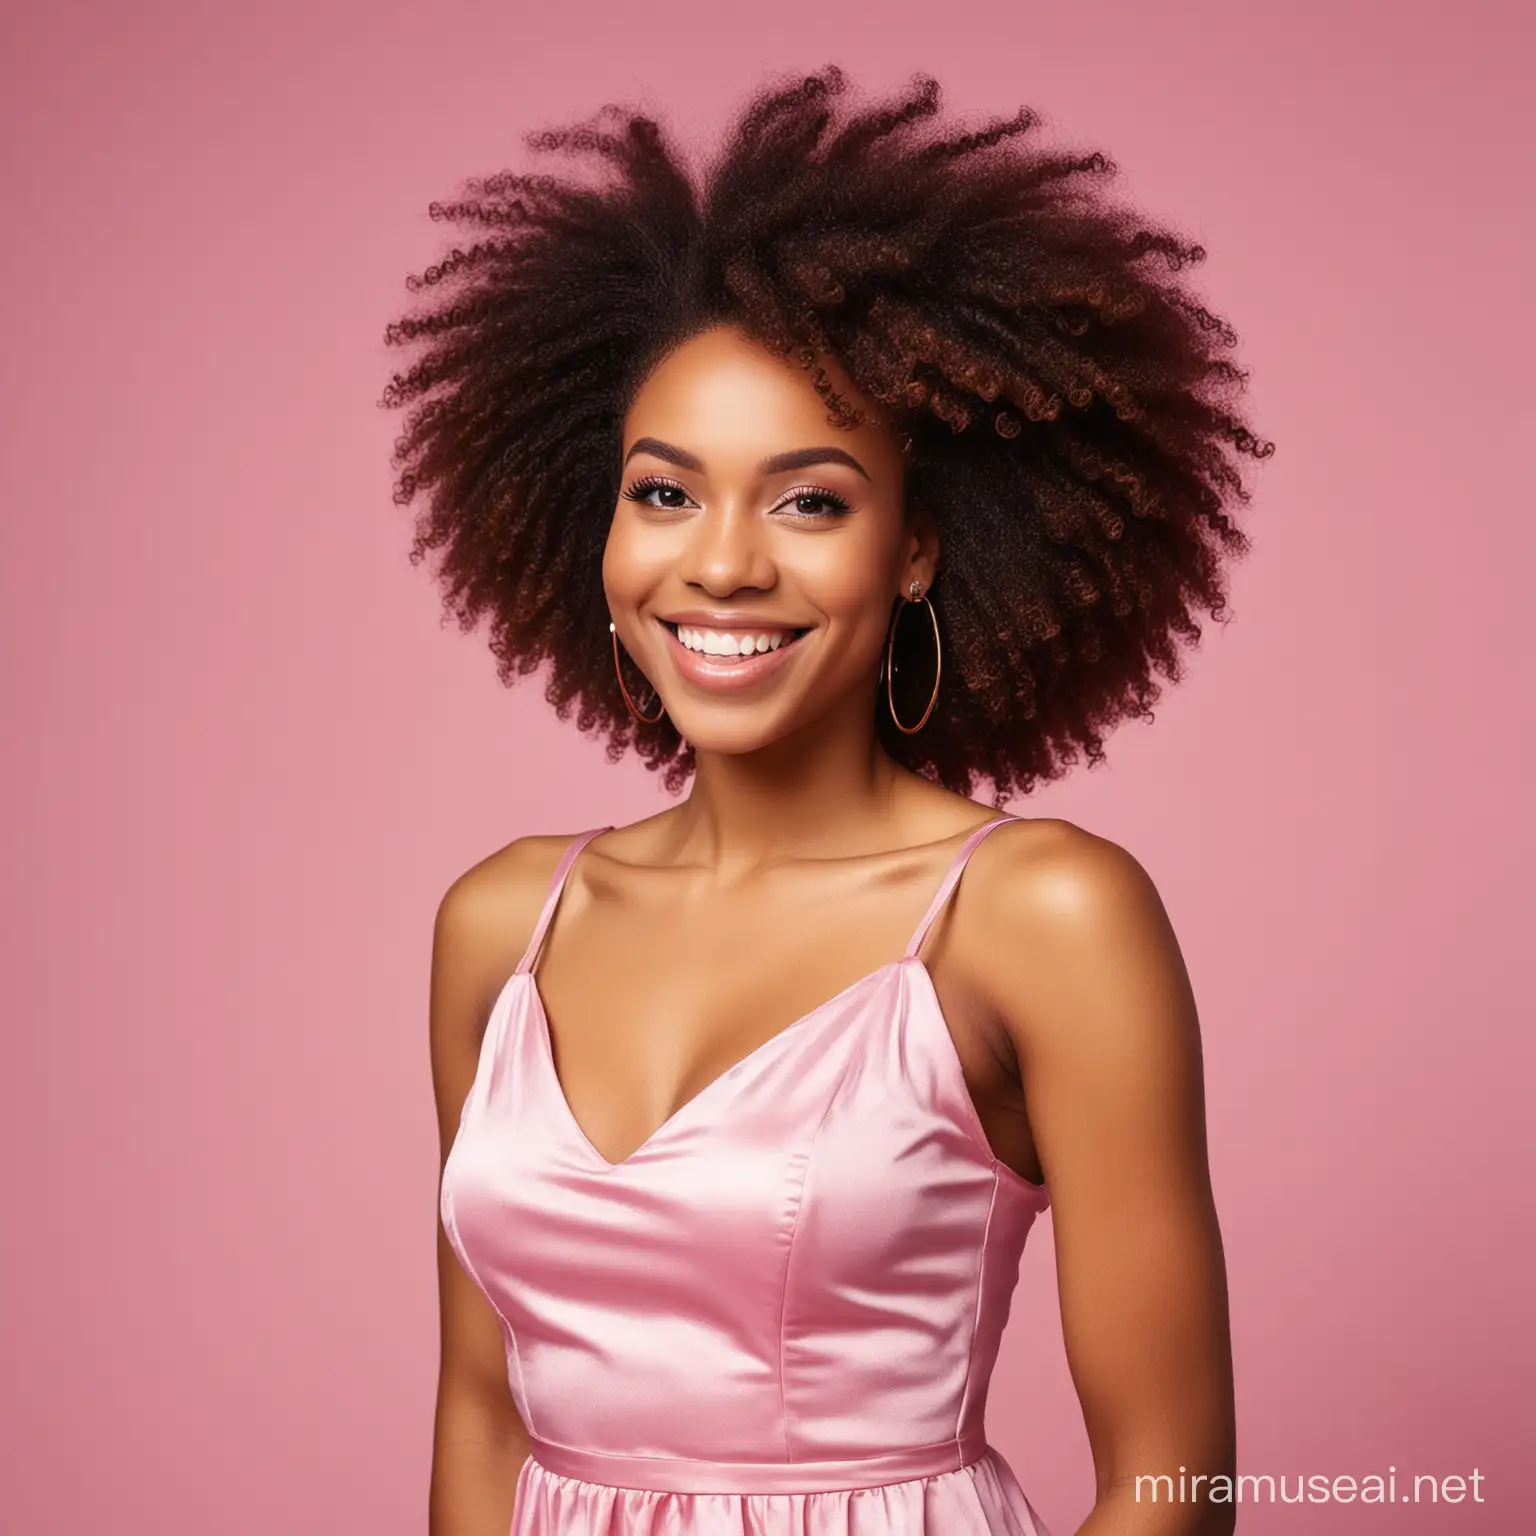 Radiant AfroAmerican Woman in Pink Party Dress Smiling